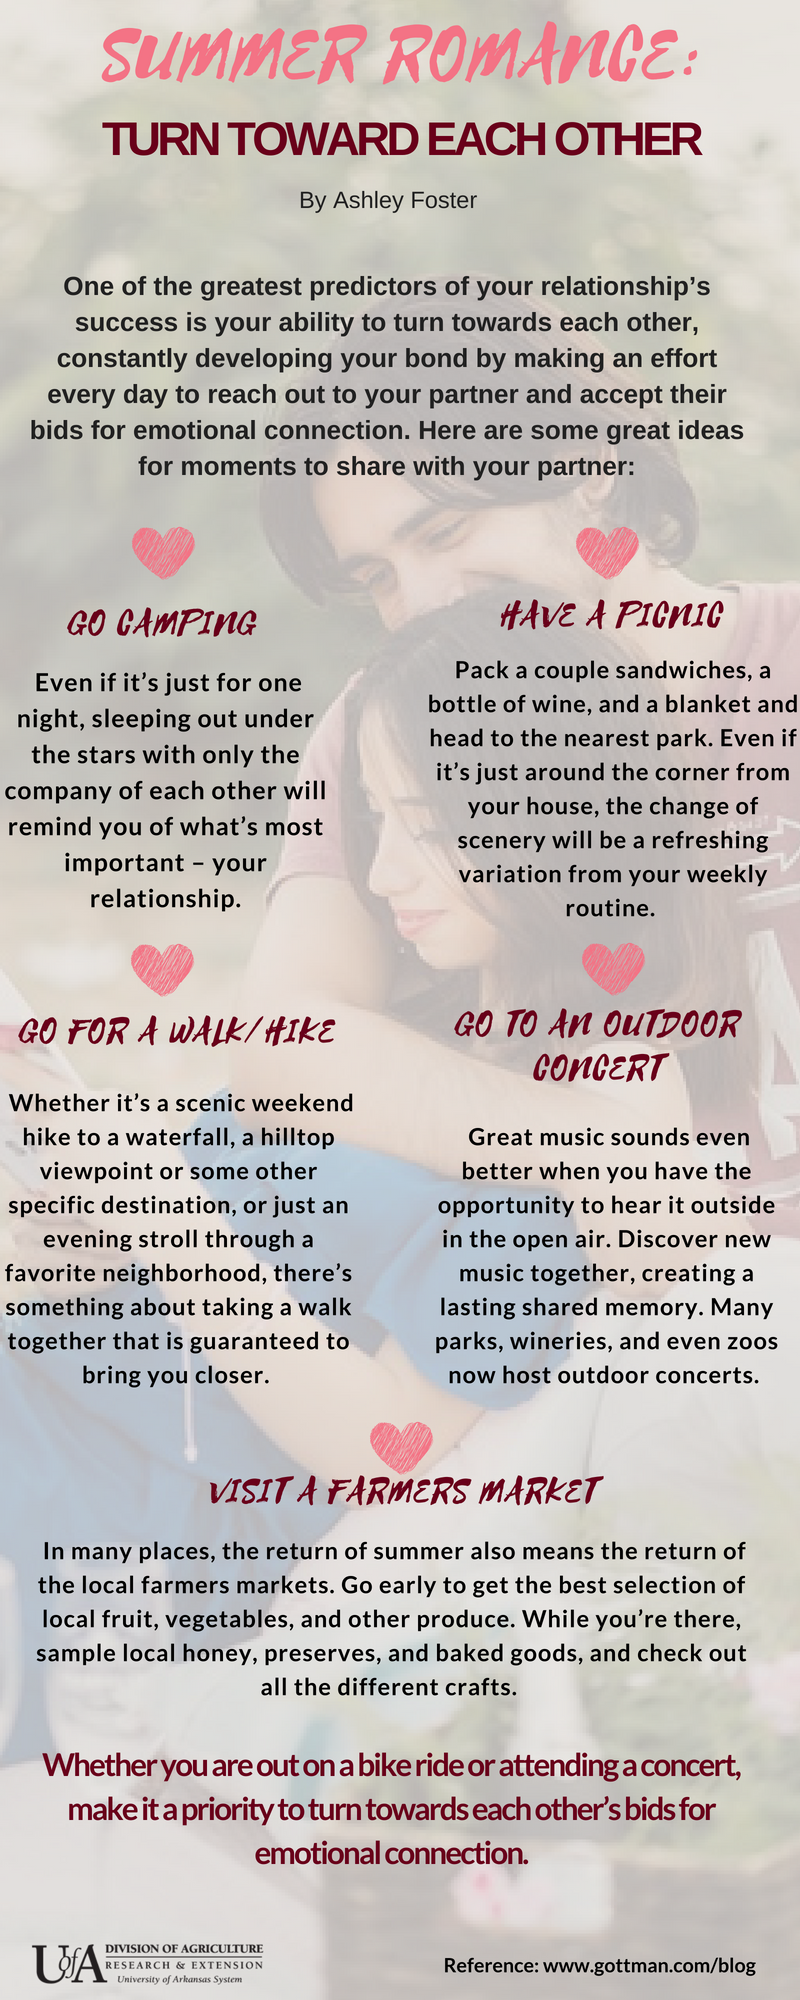 Summer Romance Infographic for transcript see below.